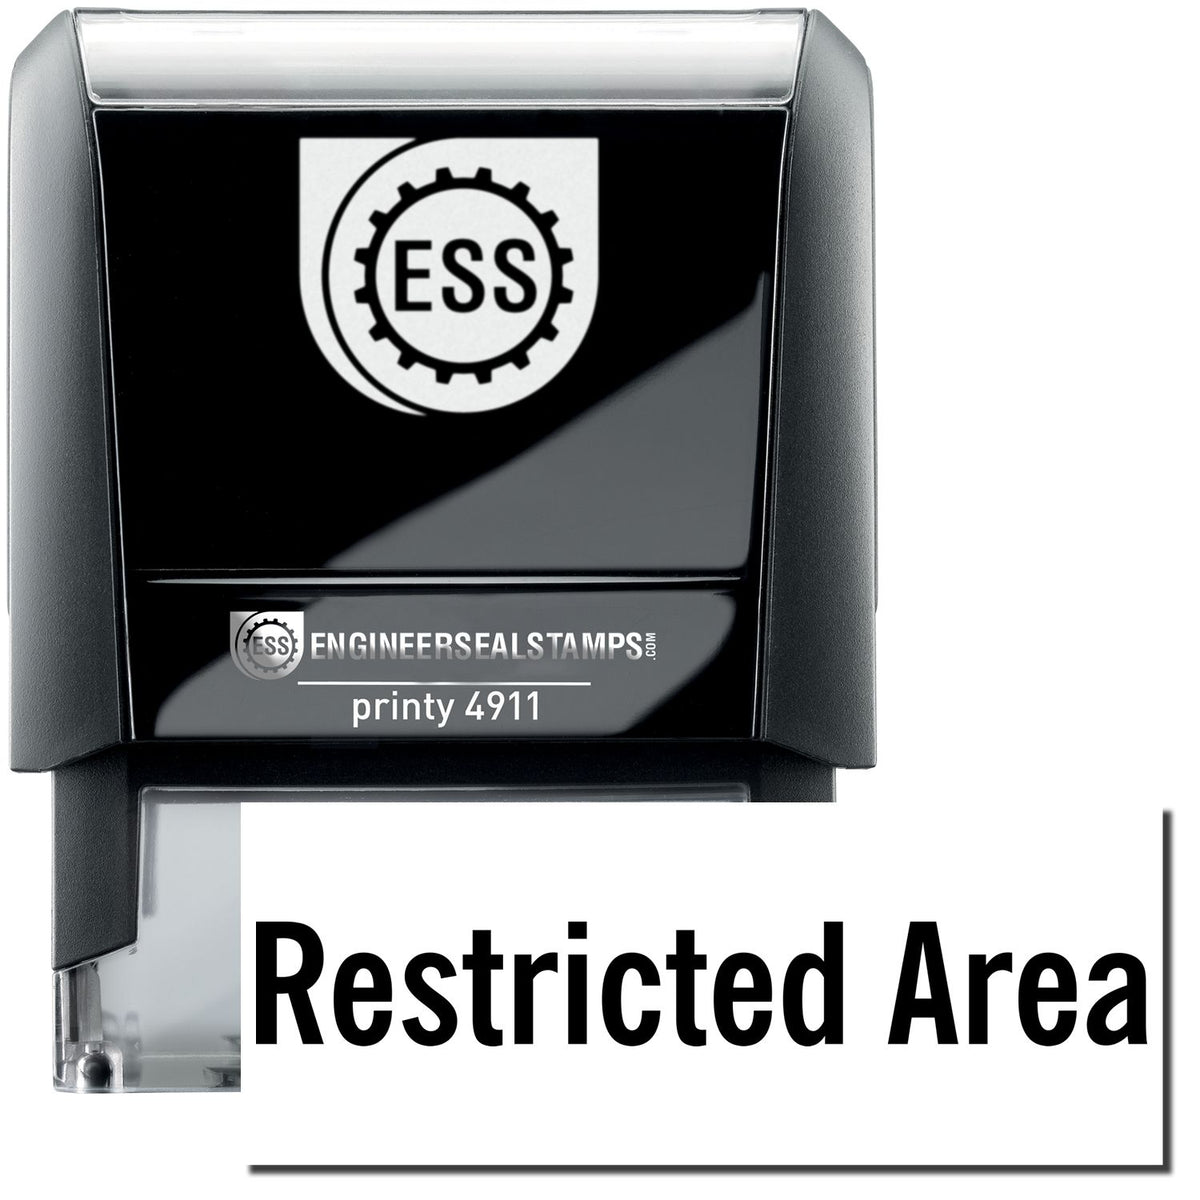 A self-inking stamp with a stamped image showing how the text &quot;Restricted Area&quot; is displayed after stamping.